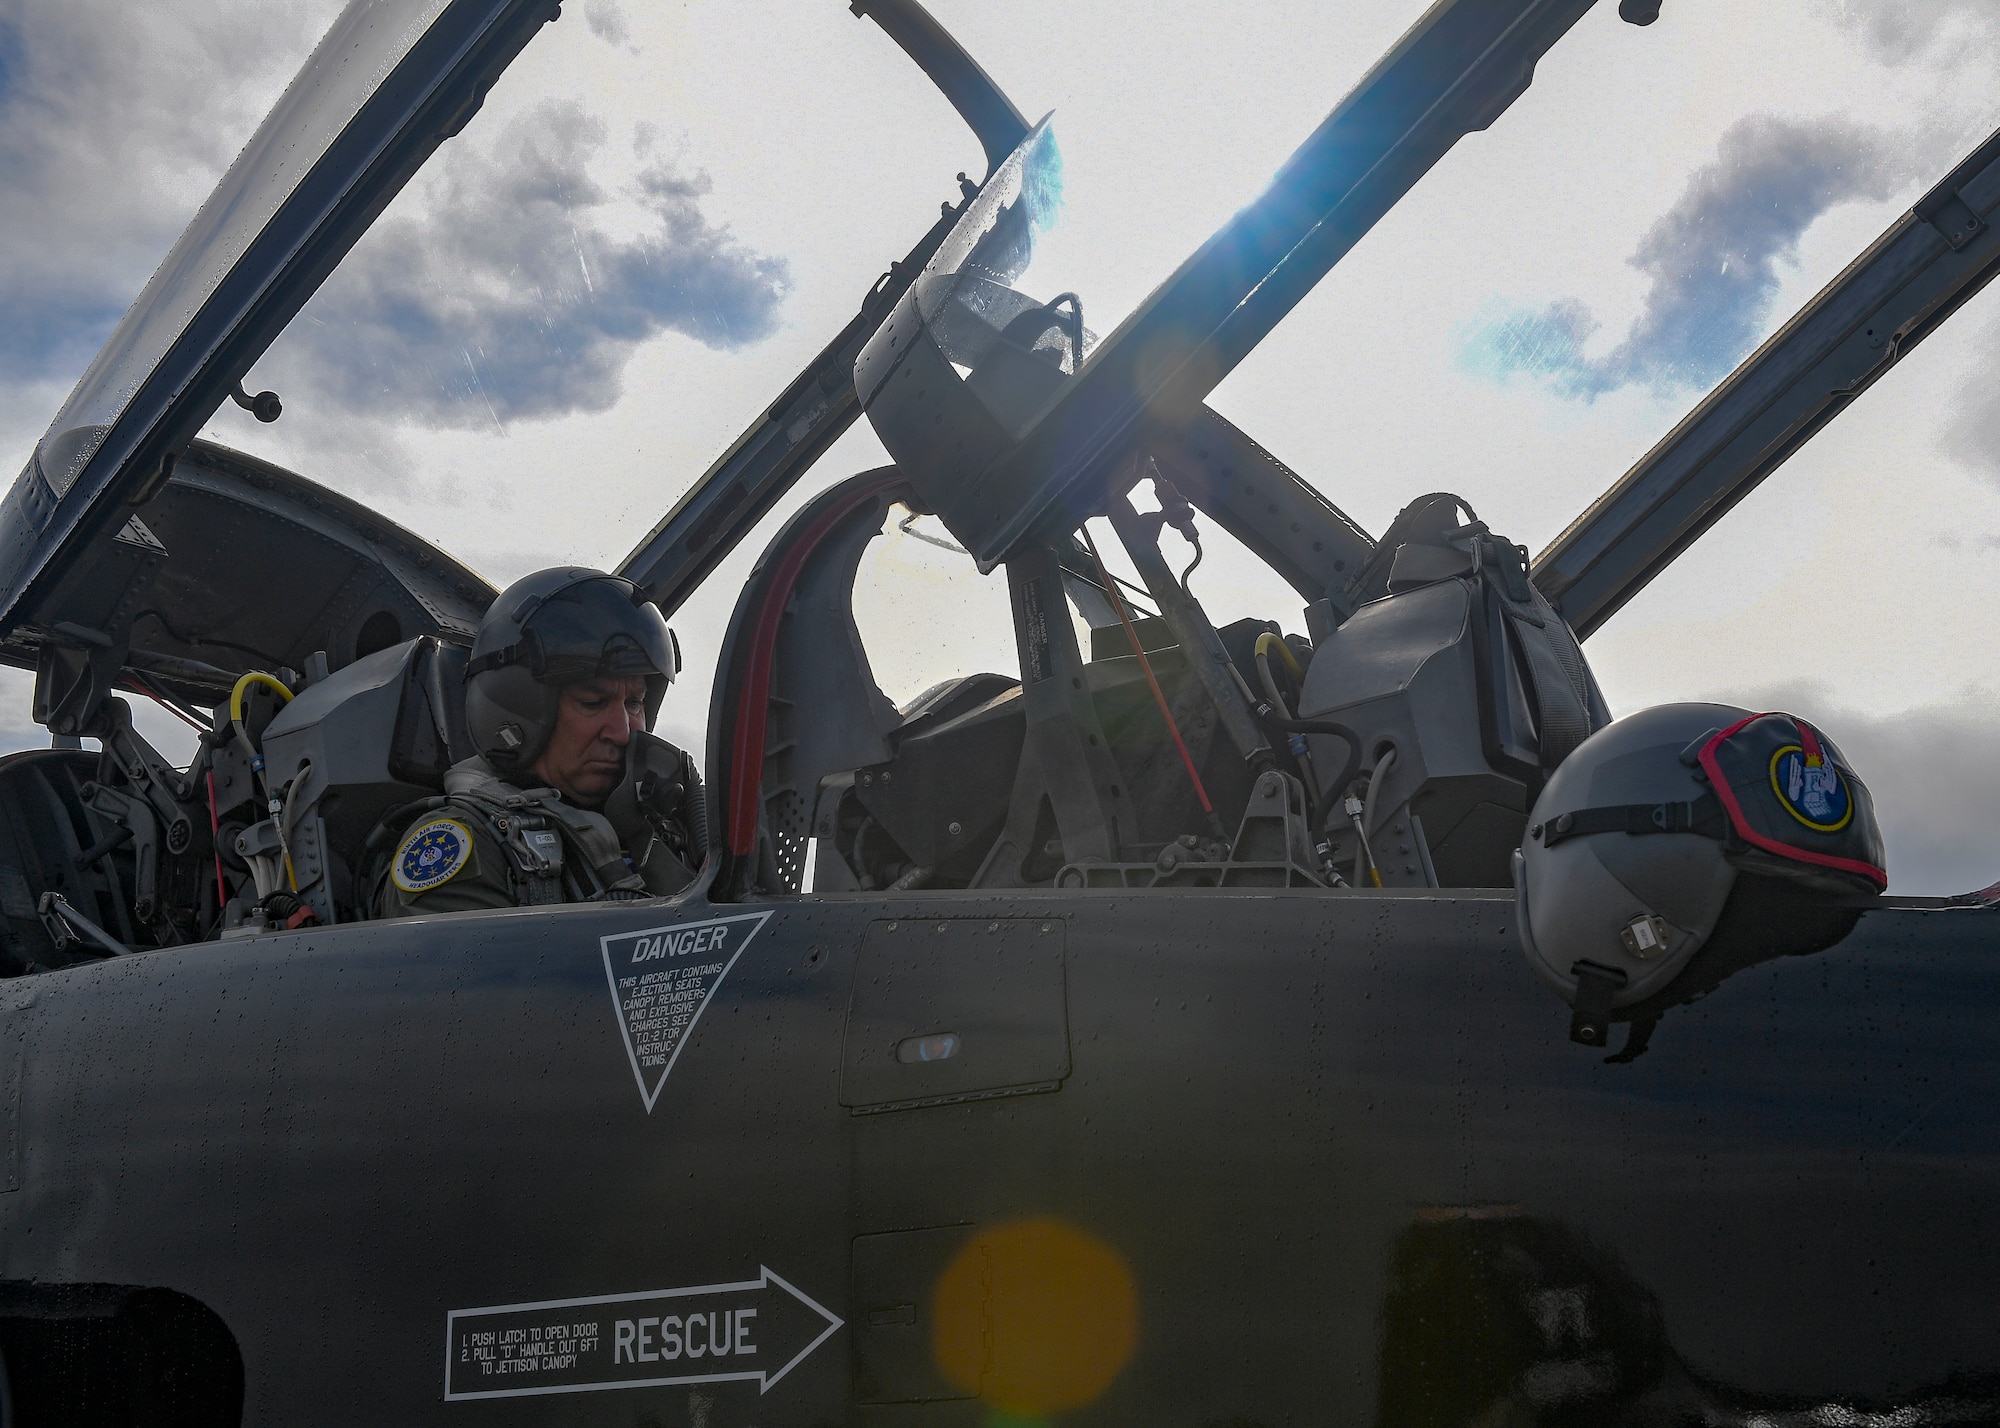 U.S. Air Force Maj. Gen. Chad Franks, Ninth Air Force commander, sits in the backseat of a T-38 Talon aircraft prior to takeoff August 28, 2019 at Joint Base Langley-Eustis, Virginia.